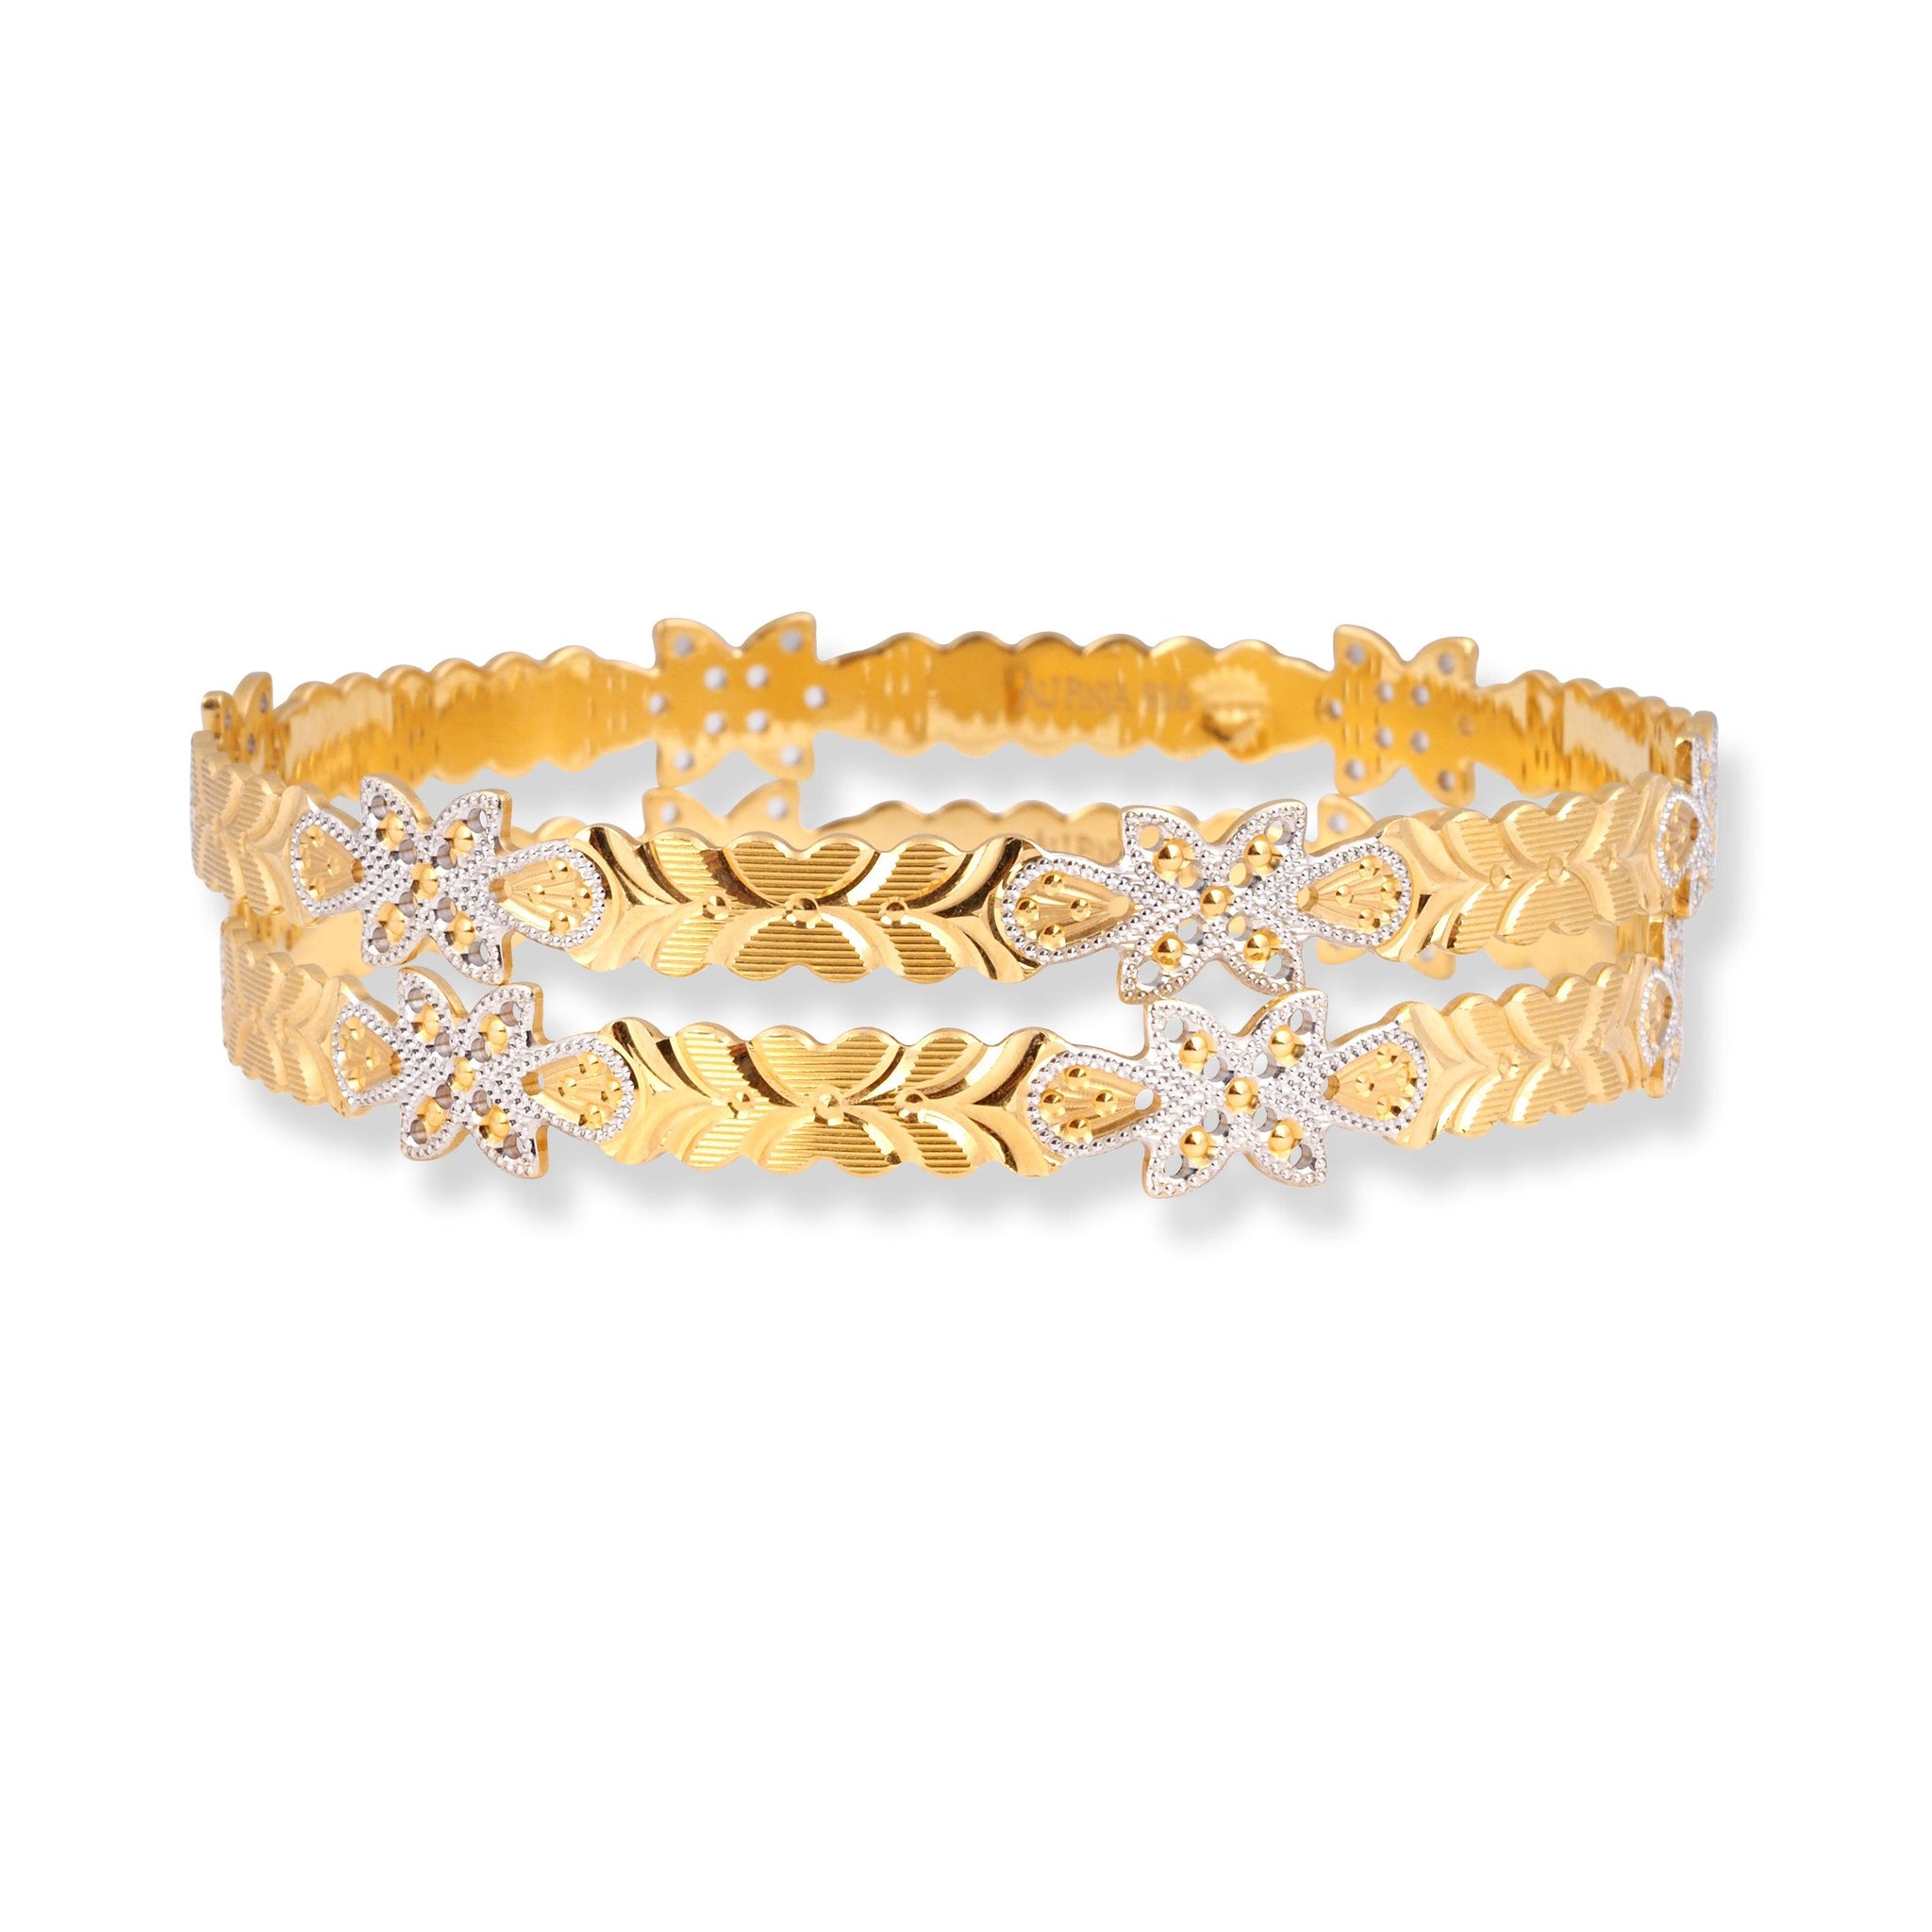 Pair of 22ct Gold Bangles with Flower Design and Rhodium Plating B-8566